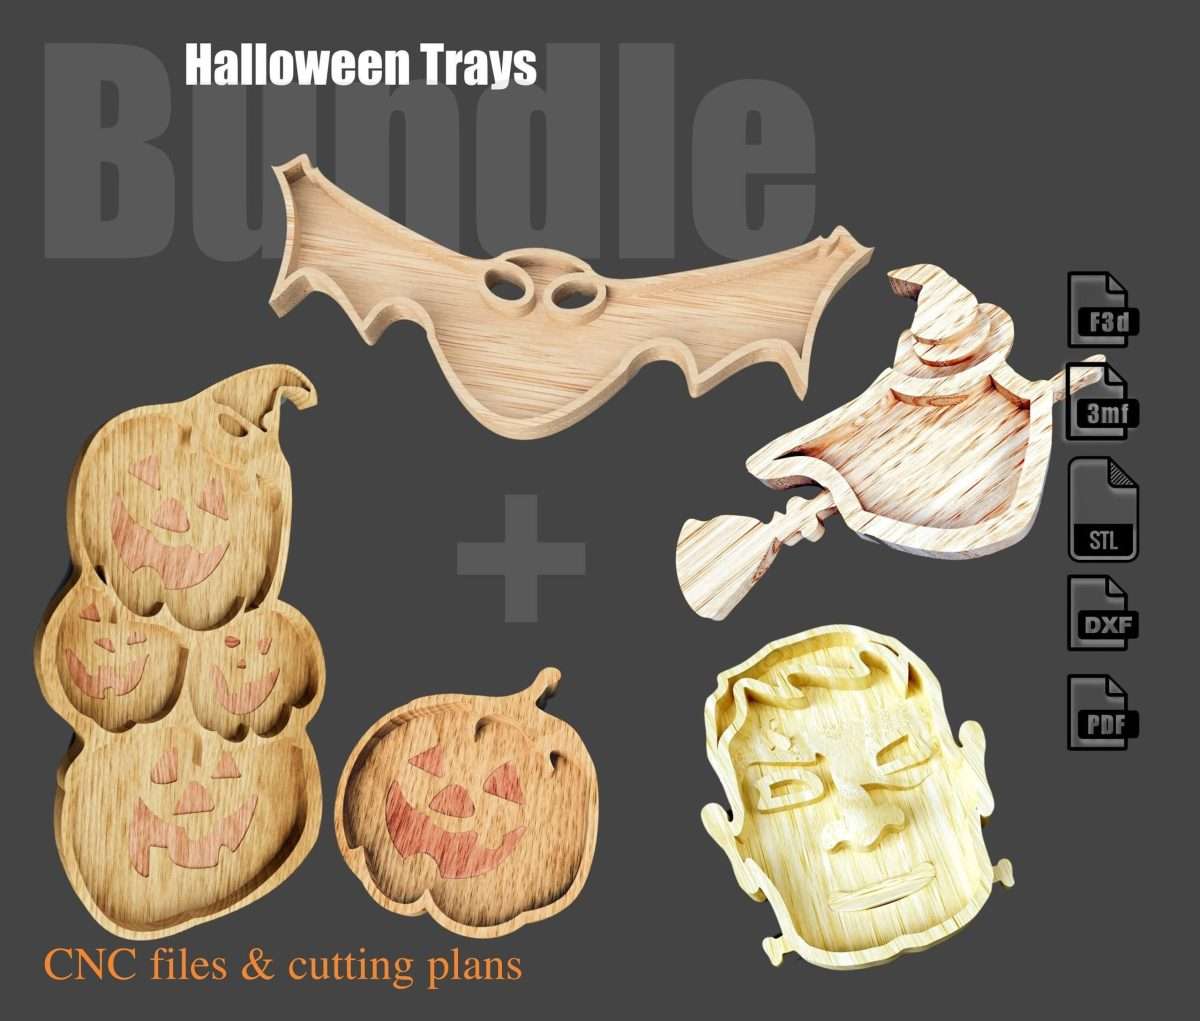 trays designs bundle of 5 unique halloween designs, one is a pumpkin, the second is a frankestain face, the third a witch, the forth is a bat and the fifth es a pumpking pile